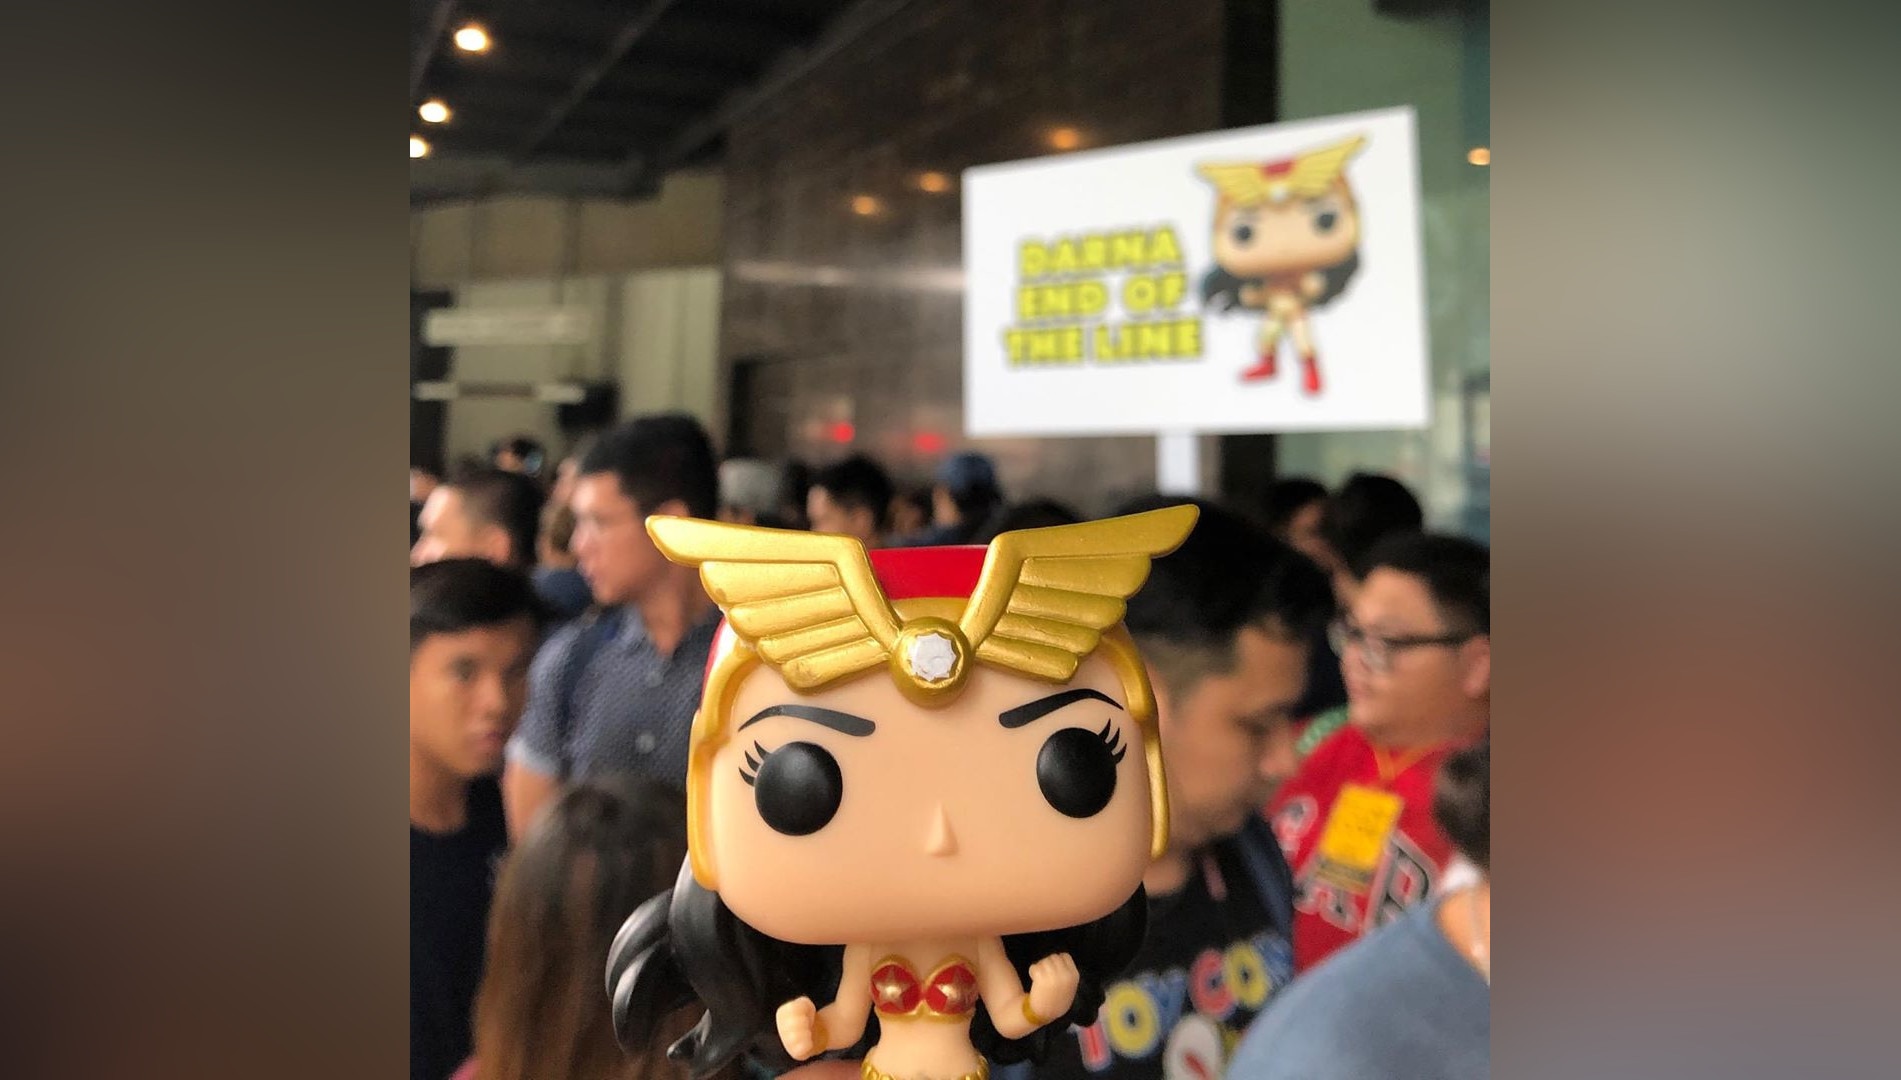 Pinoy Funko fanatics assemble for an exciting time with Darna